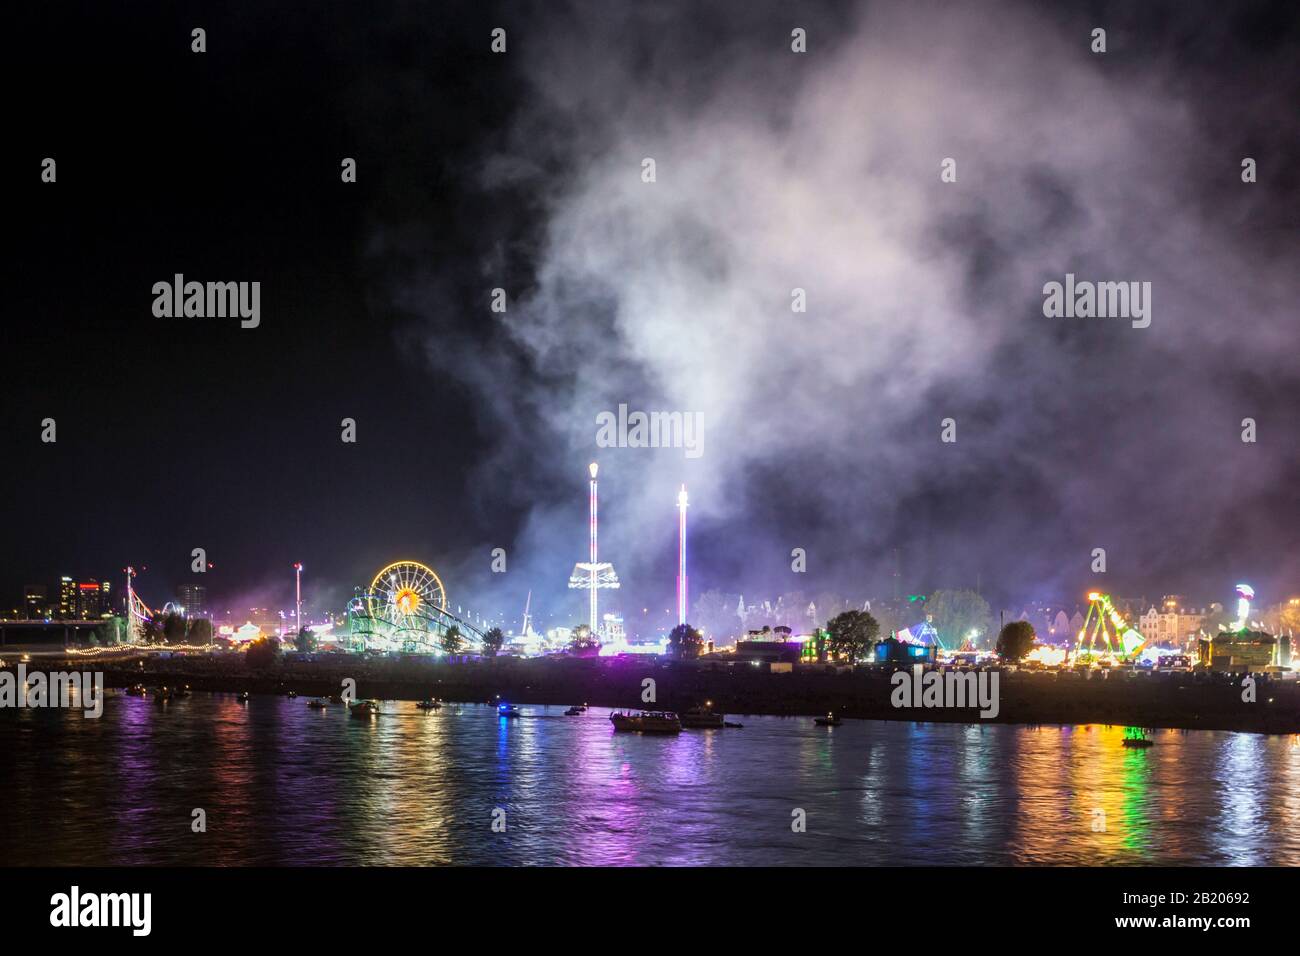 Pollution from the smoke of a large firework display during the Rhine fun fair Stock Photo